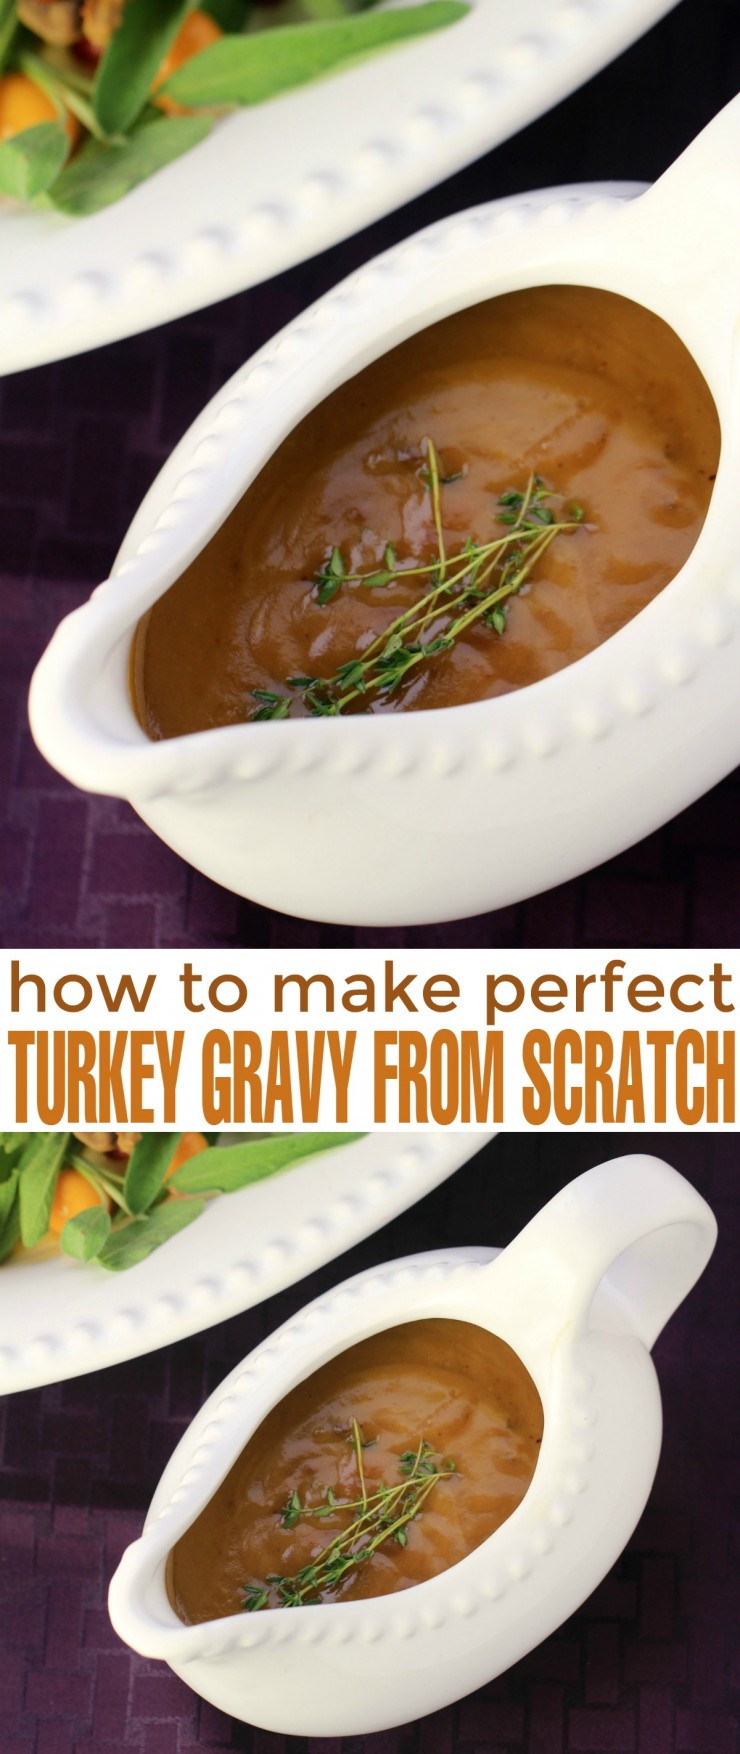 Turkey Gravy From Scratch
 How to Make Perfect Turkey Gravy from Scratch Life Love Liz